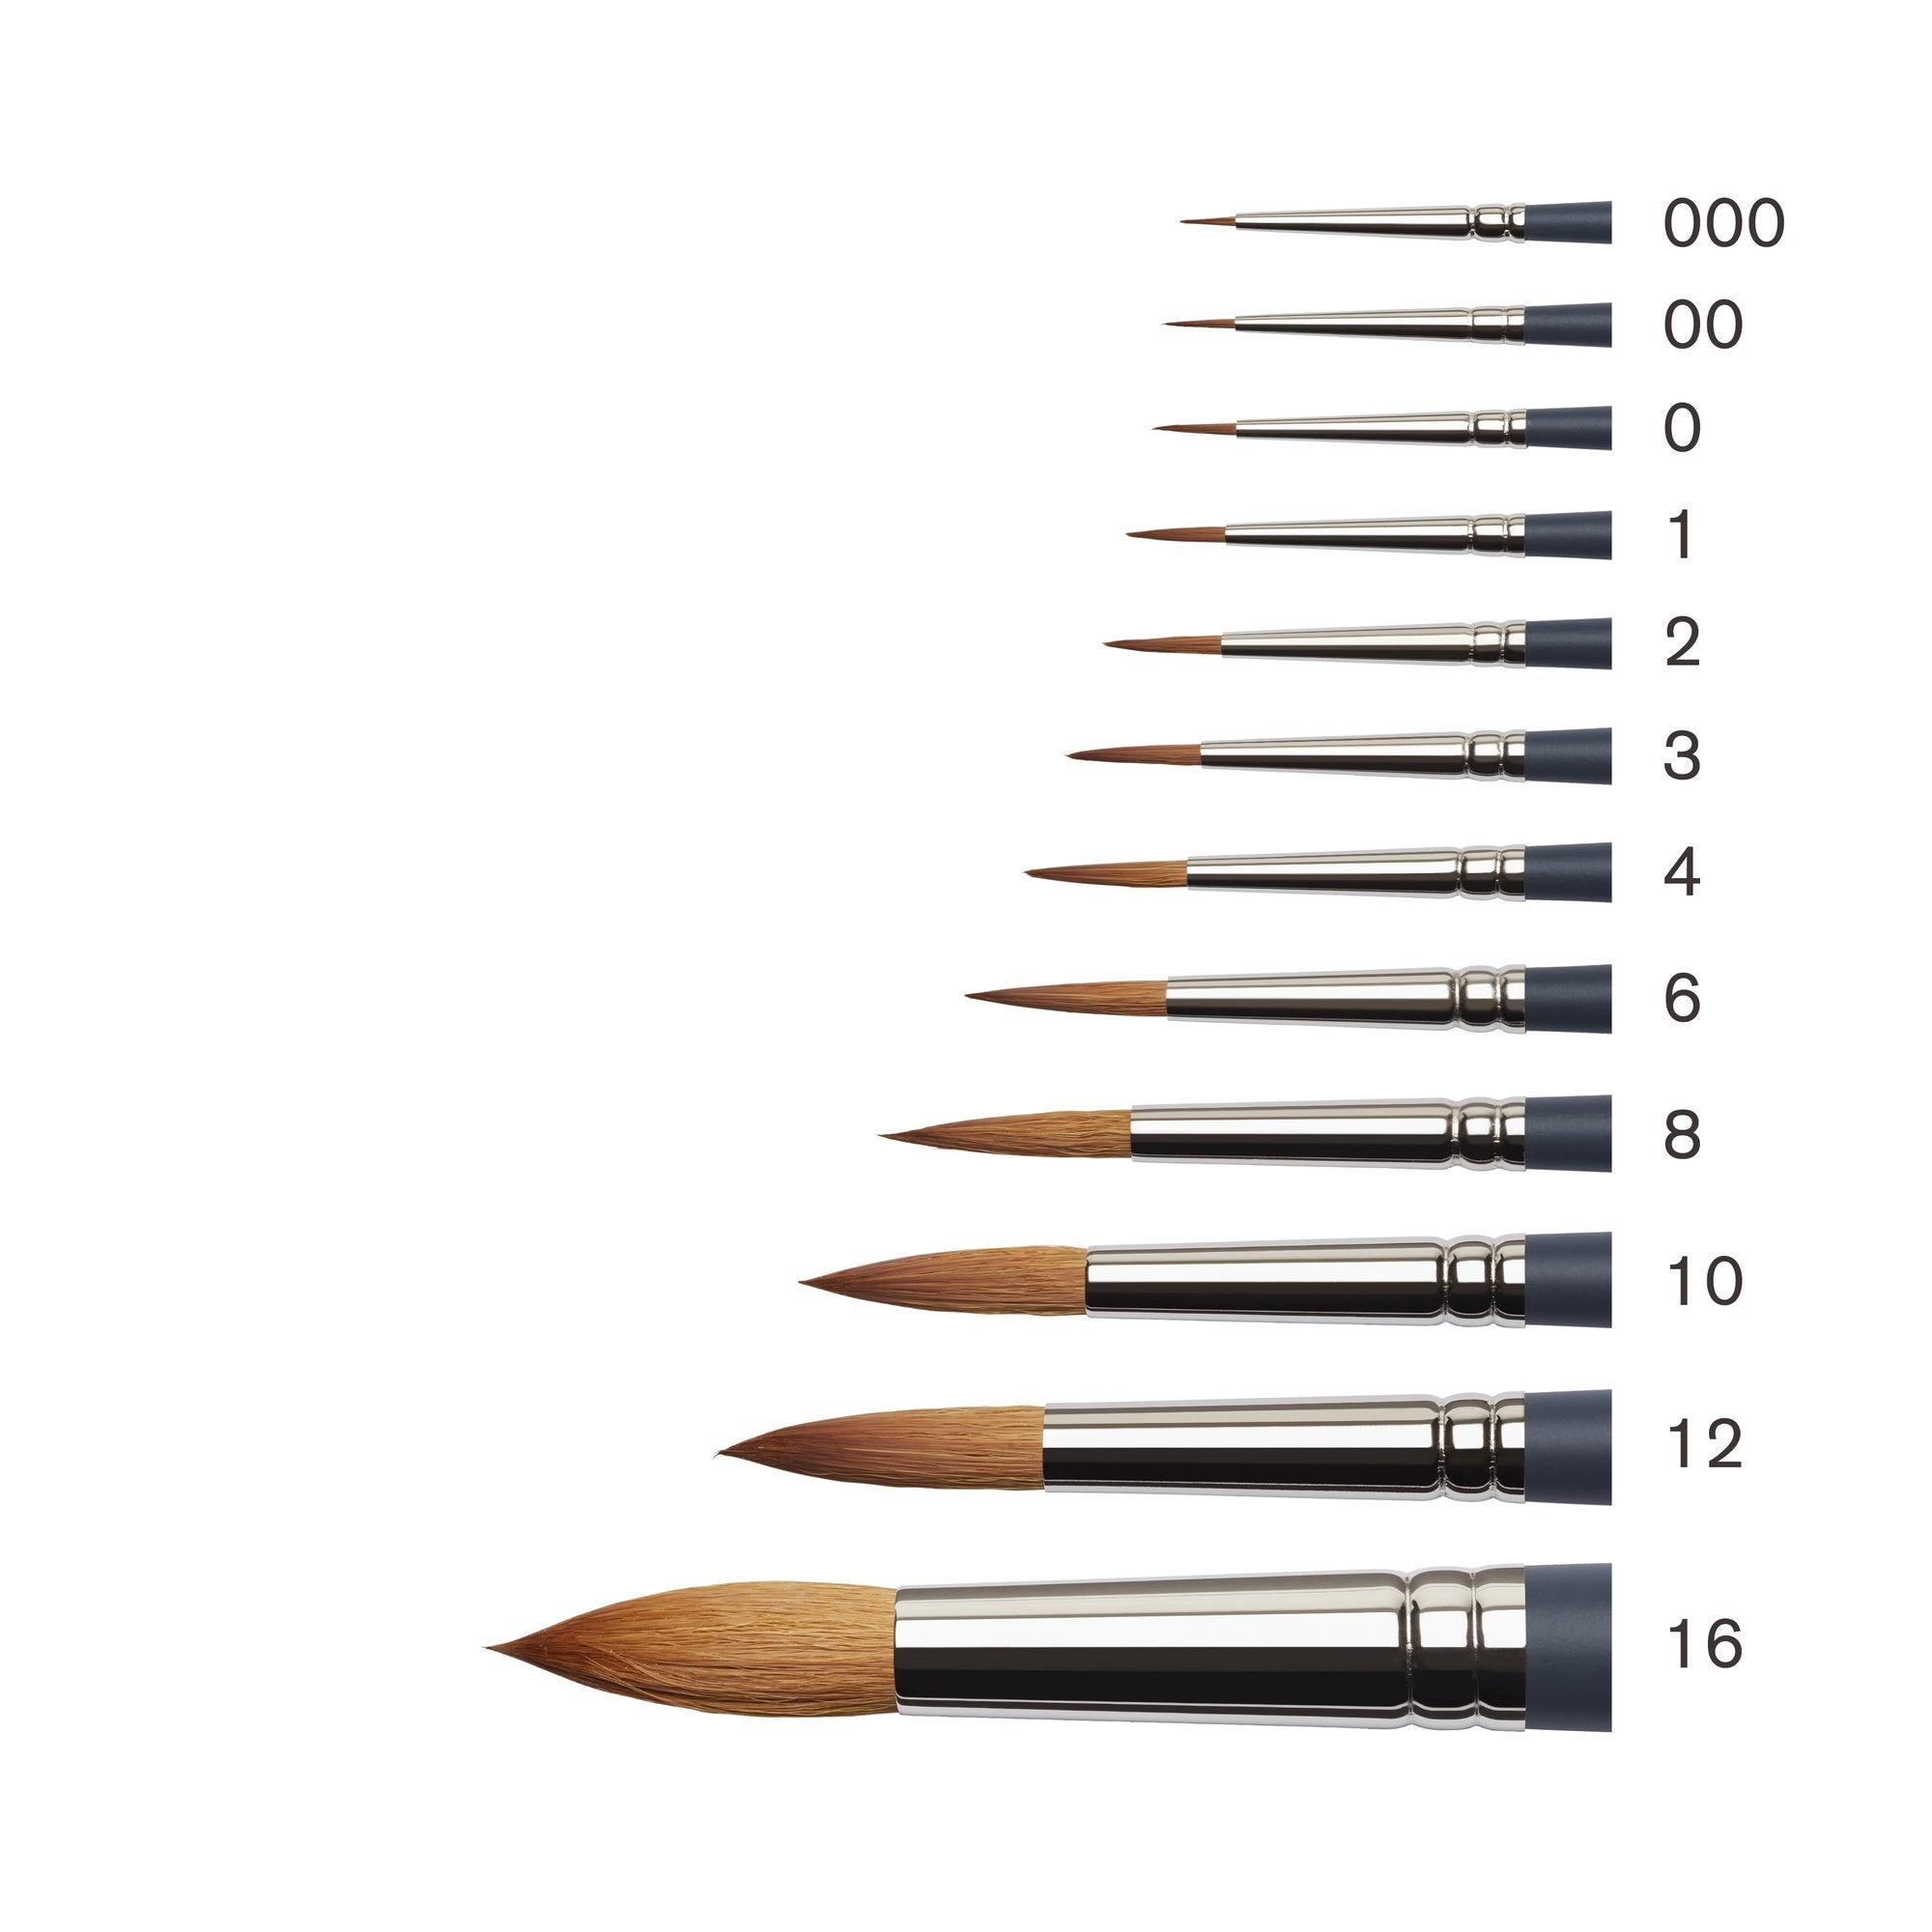 5011101Winsor & Newton have created a new line professional synthetic sable brushes, made using the finest materials to rival natural sable. 